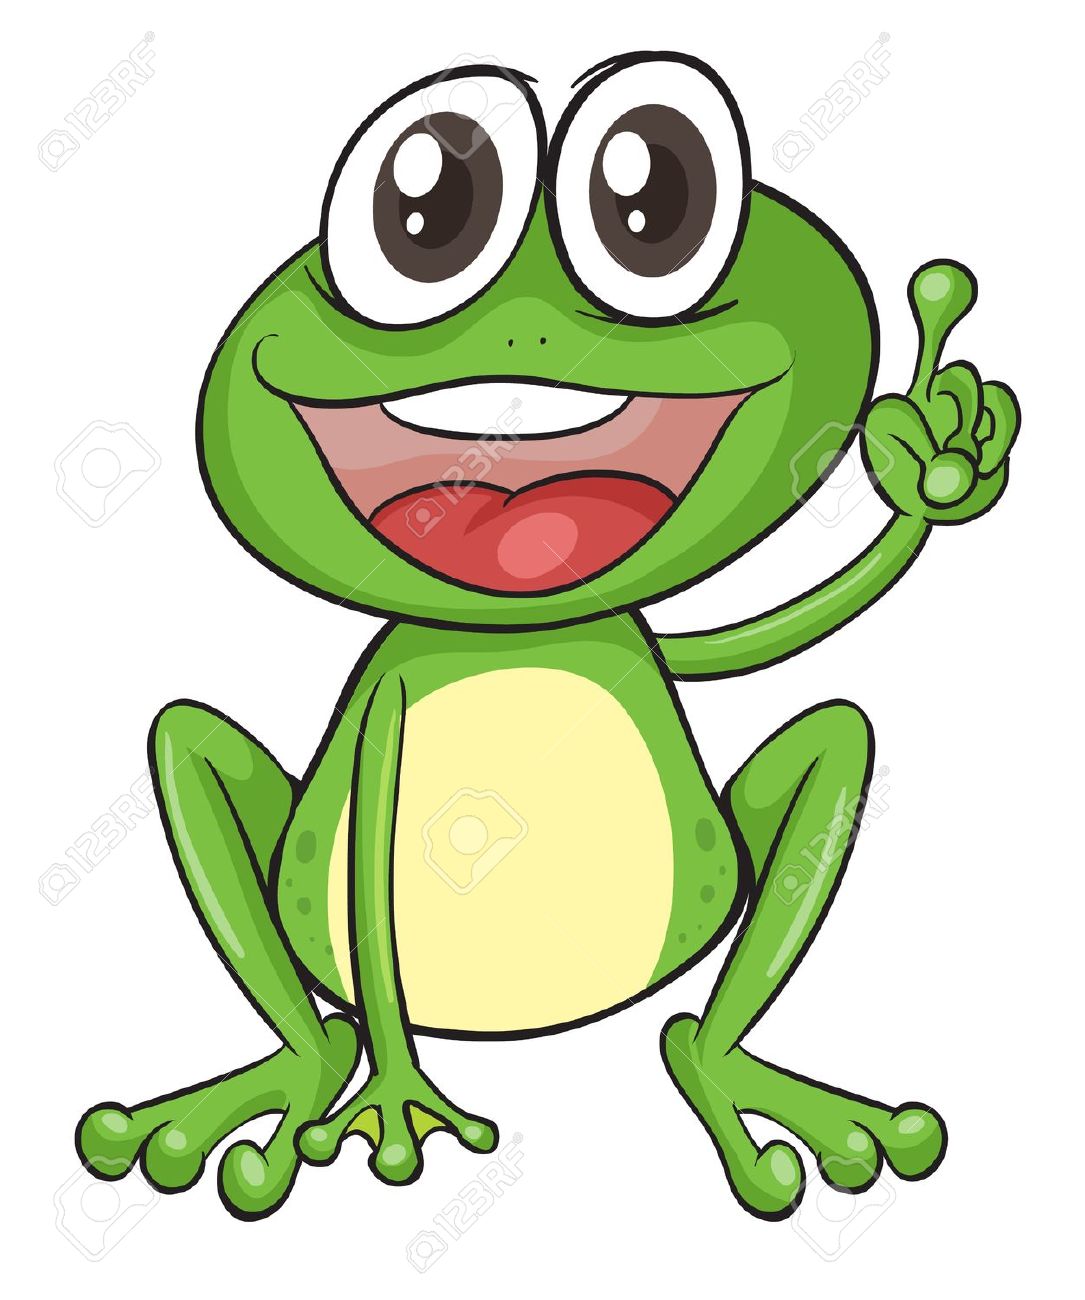 Illustration of a frog on a white background royalty free cliparts